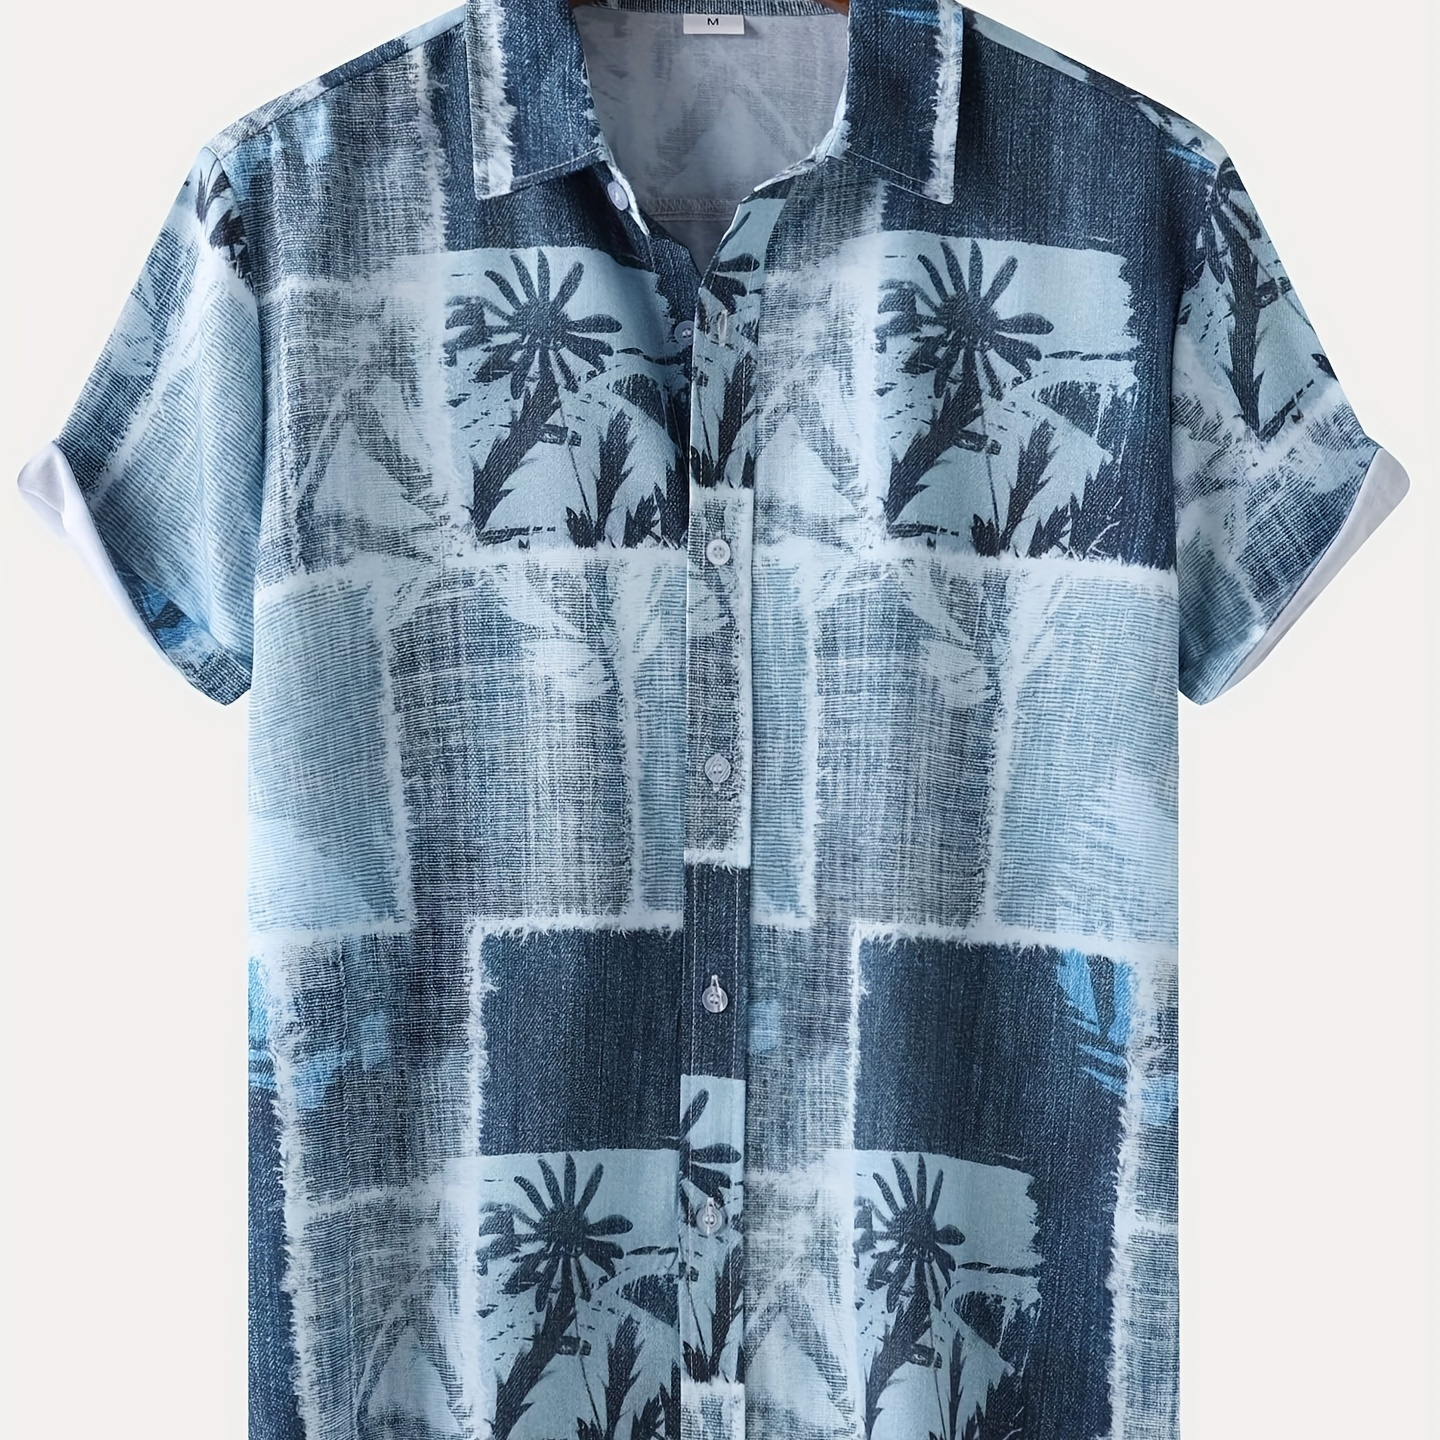 

Men's Trendy Hawaiian Lapel Collar Graphic Shirt With Stylish Palm Tree Print For Summer Vacation And Casual Wear